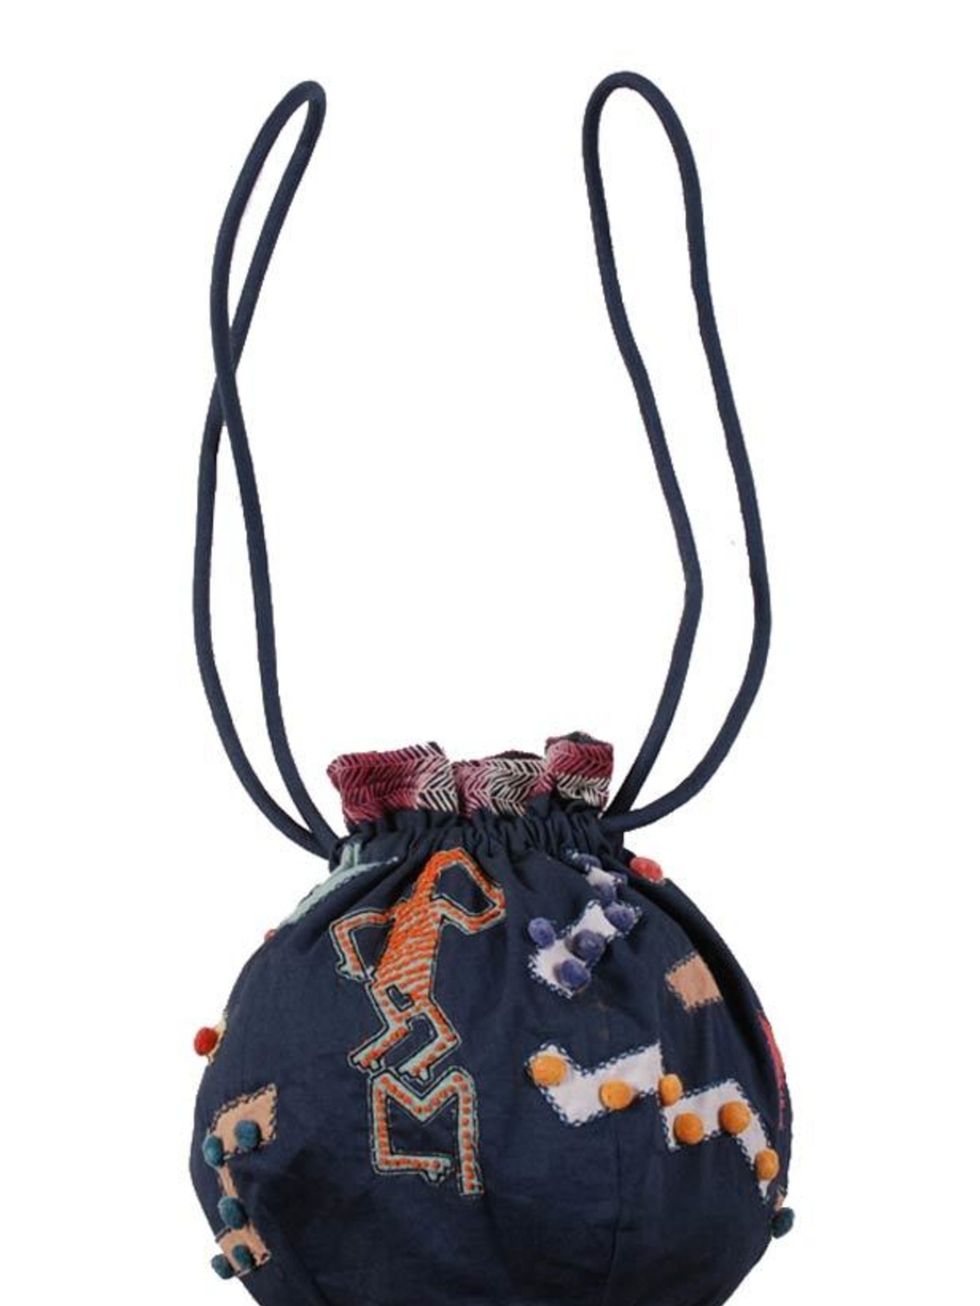 <p>If, like us your mind is turning to summer holidays, then make this pouch bag your must-buyPerks &amp; Mini embroidered pouch bag, £92, at <a href="http://goodhoodstore.com/?page=51&amp;id=1994&amp;type=womens">Goodhood</a> </p>